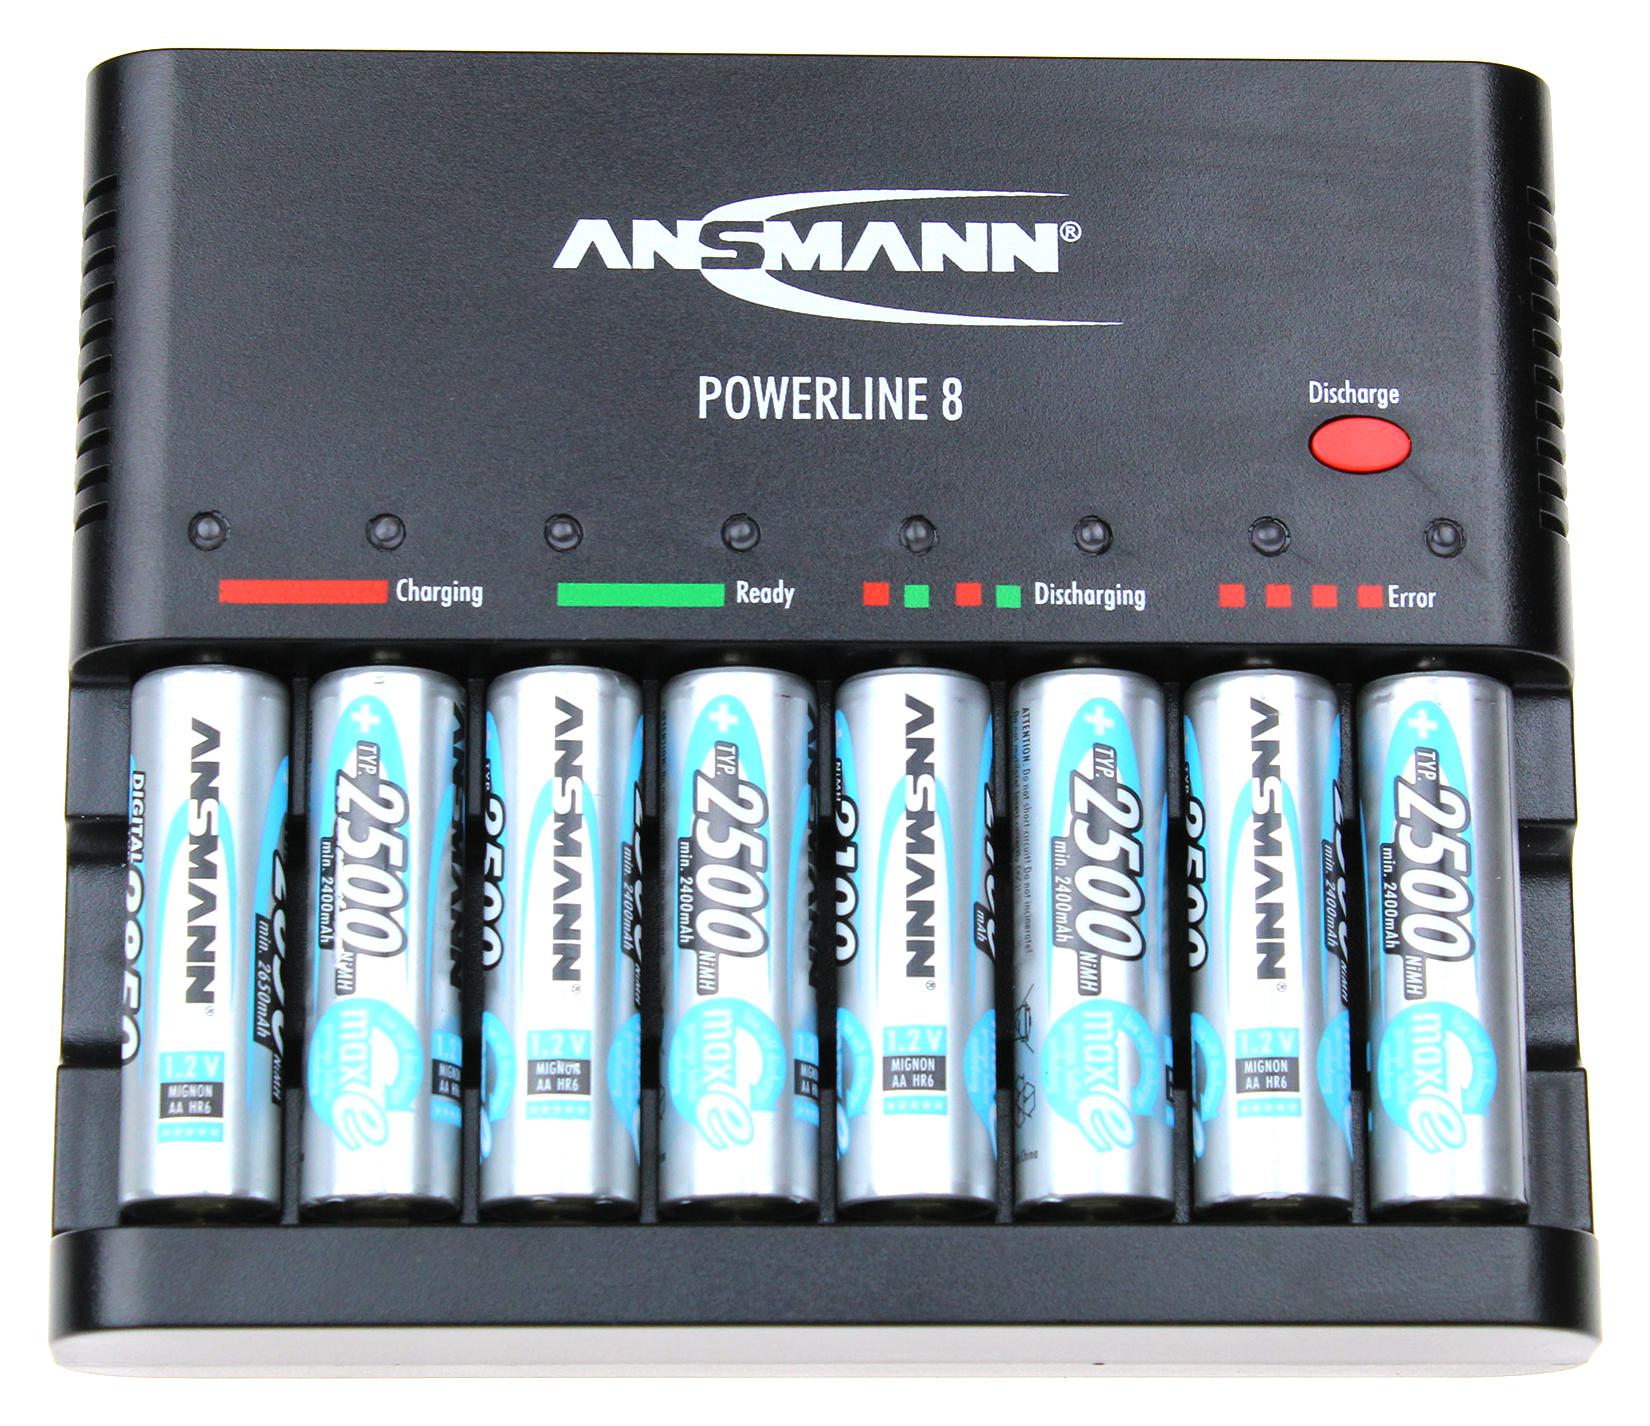 Ansmann 1001-0006-Uk-1 Powerline 8 Charger With 8 Aa Batteries